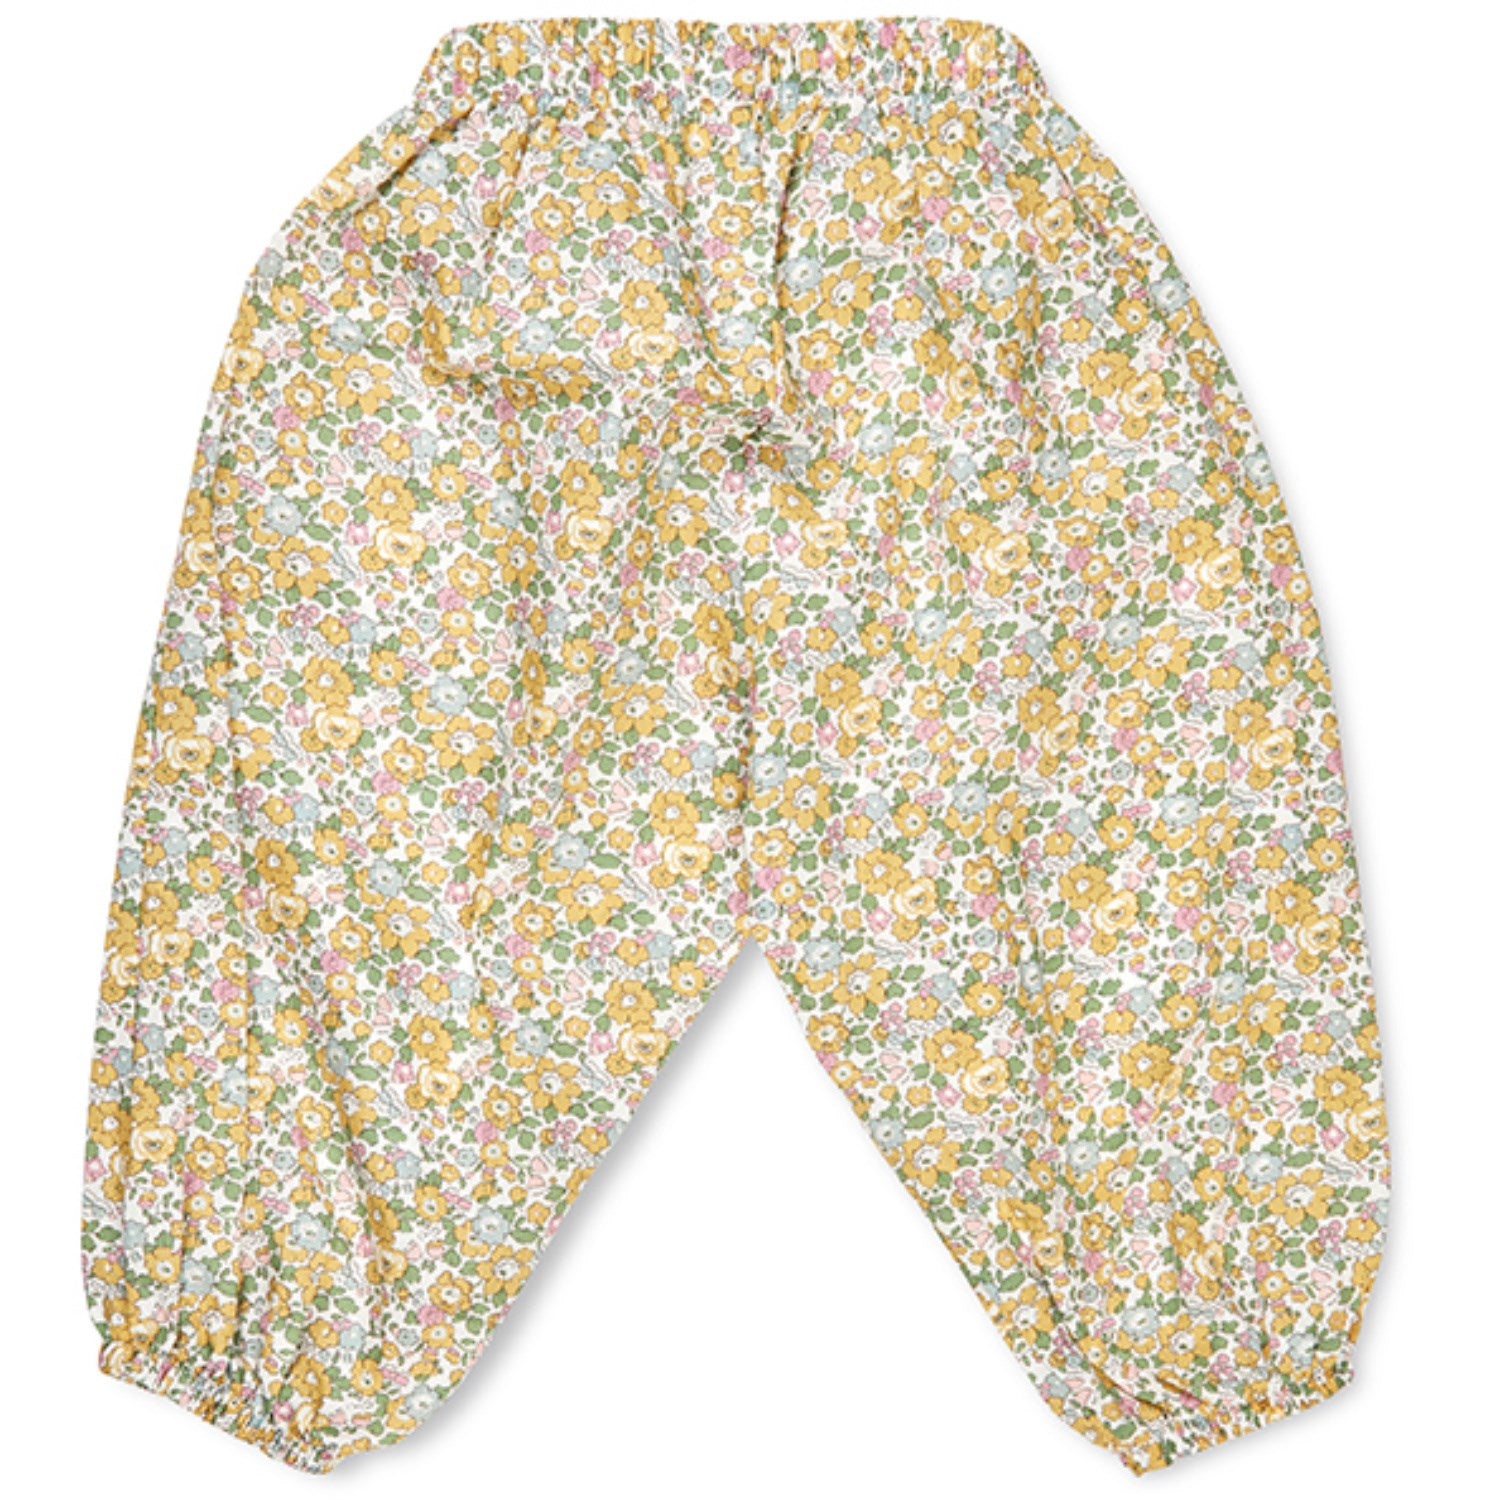 Lalaby Betsy Ann Pixi Pants - Betsy Ann 6